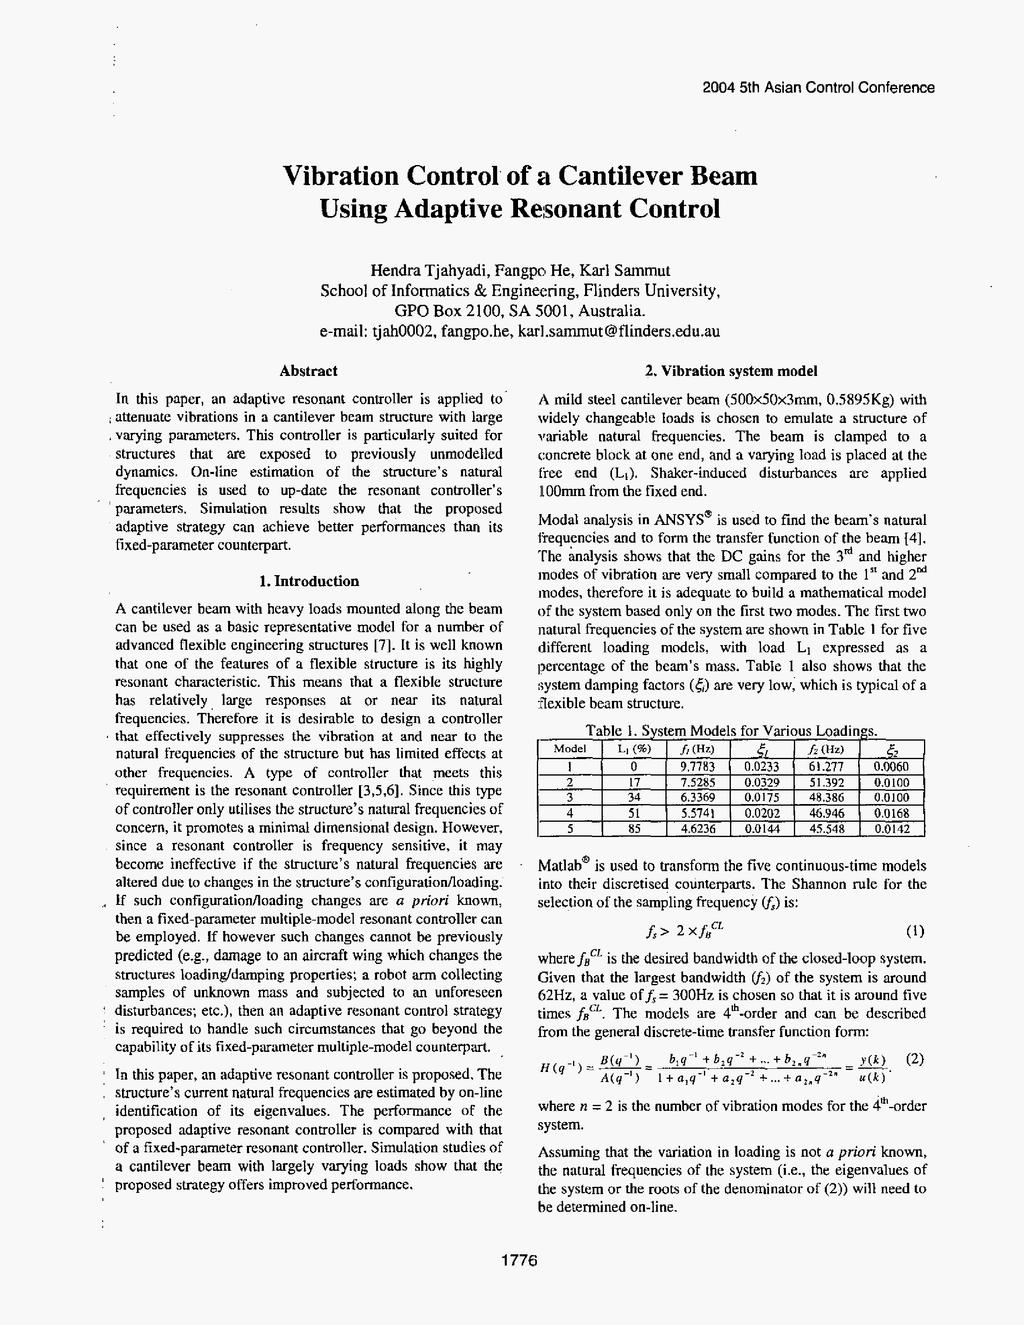 2004 5th Asian Control Conference Vibration Control' of a Cantilever Beam Using Adaptive Resonant Control Hendra Tjahyadi, Fangpcl He, Karl Sammut School of Informatics & Engineering, Flinders